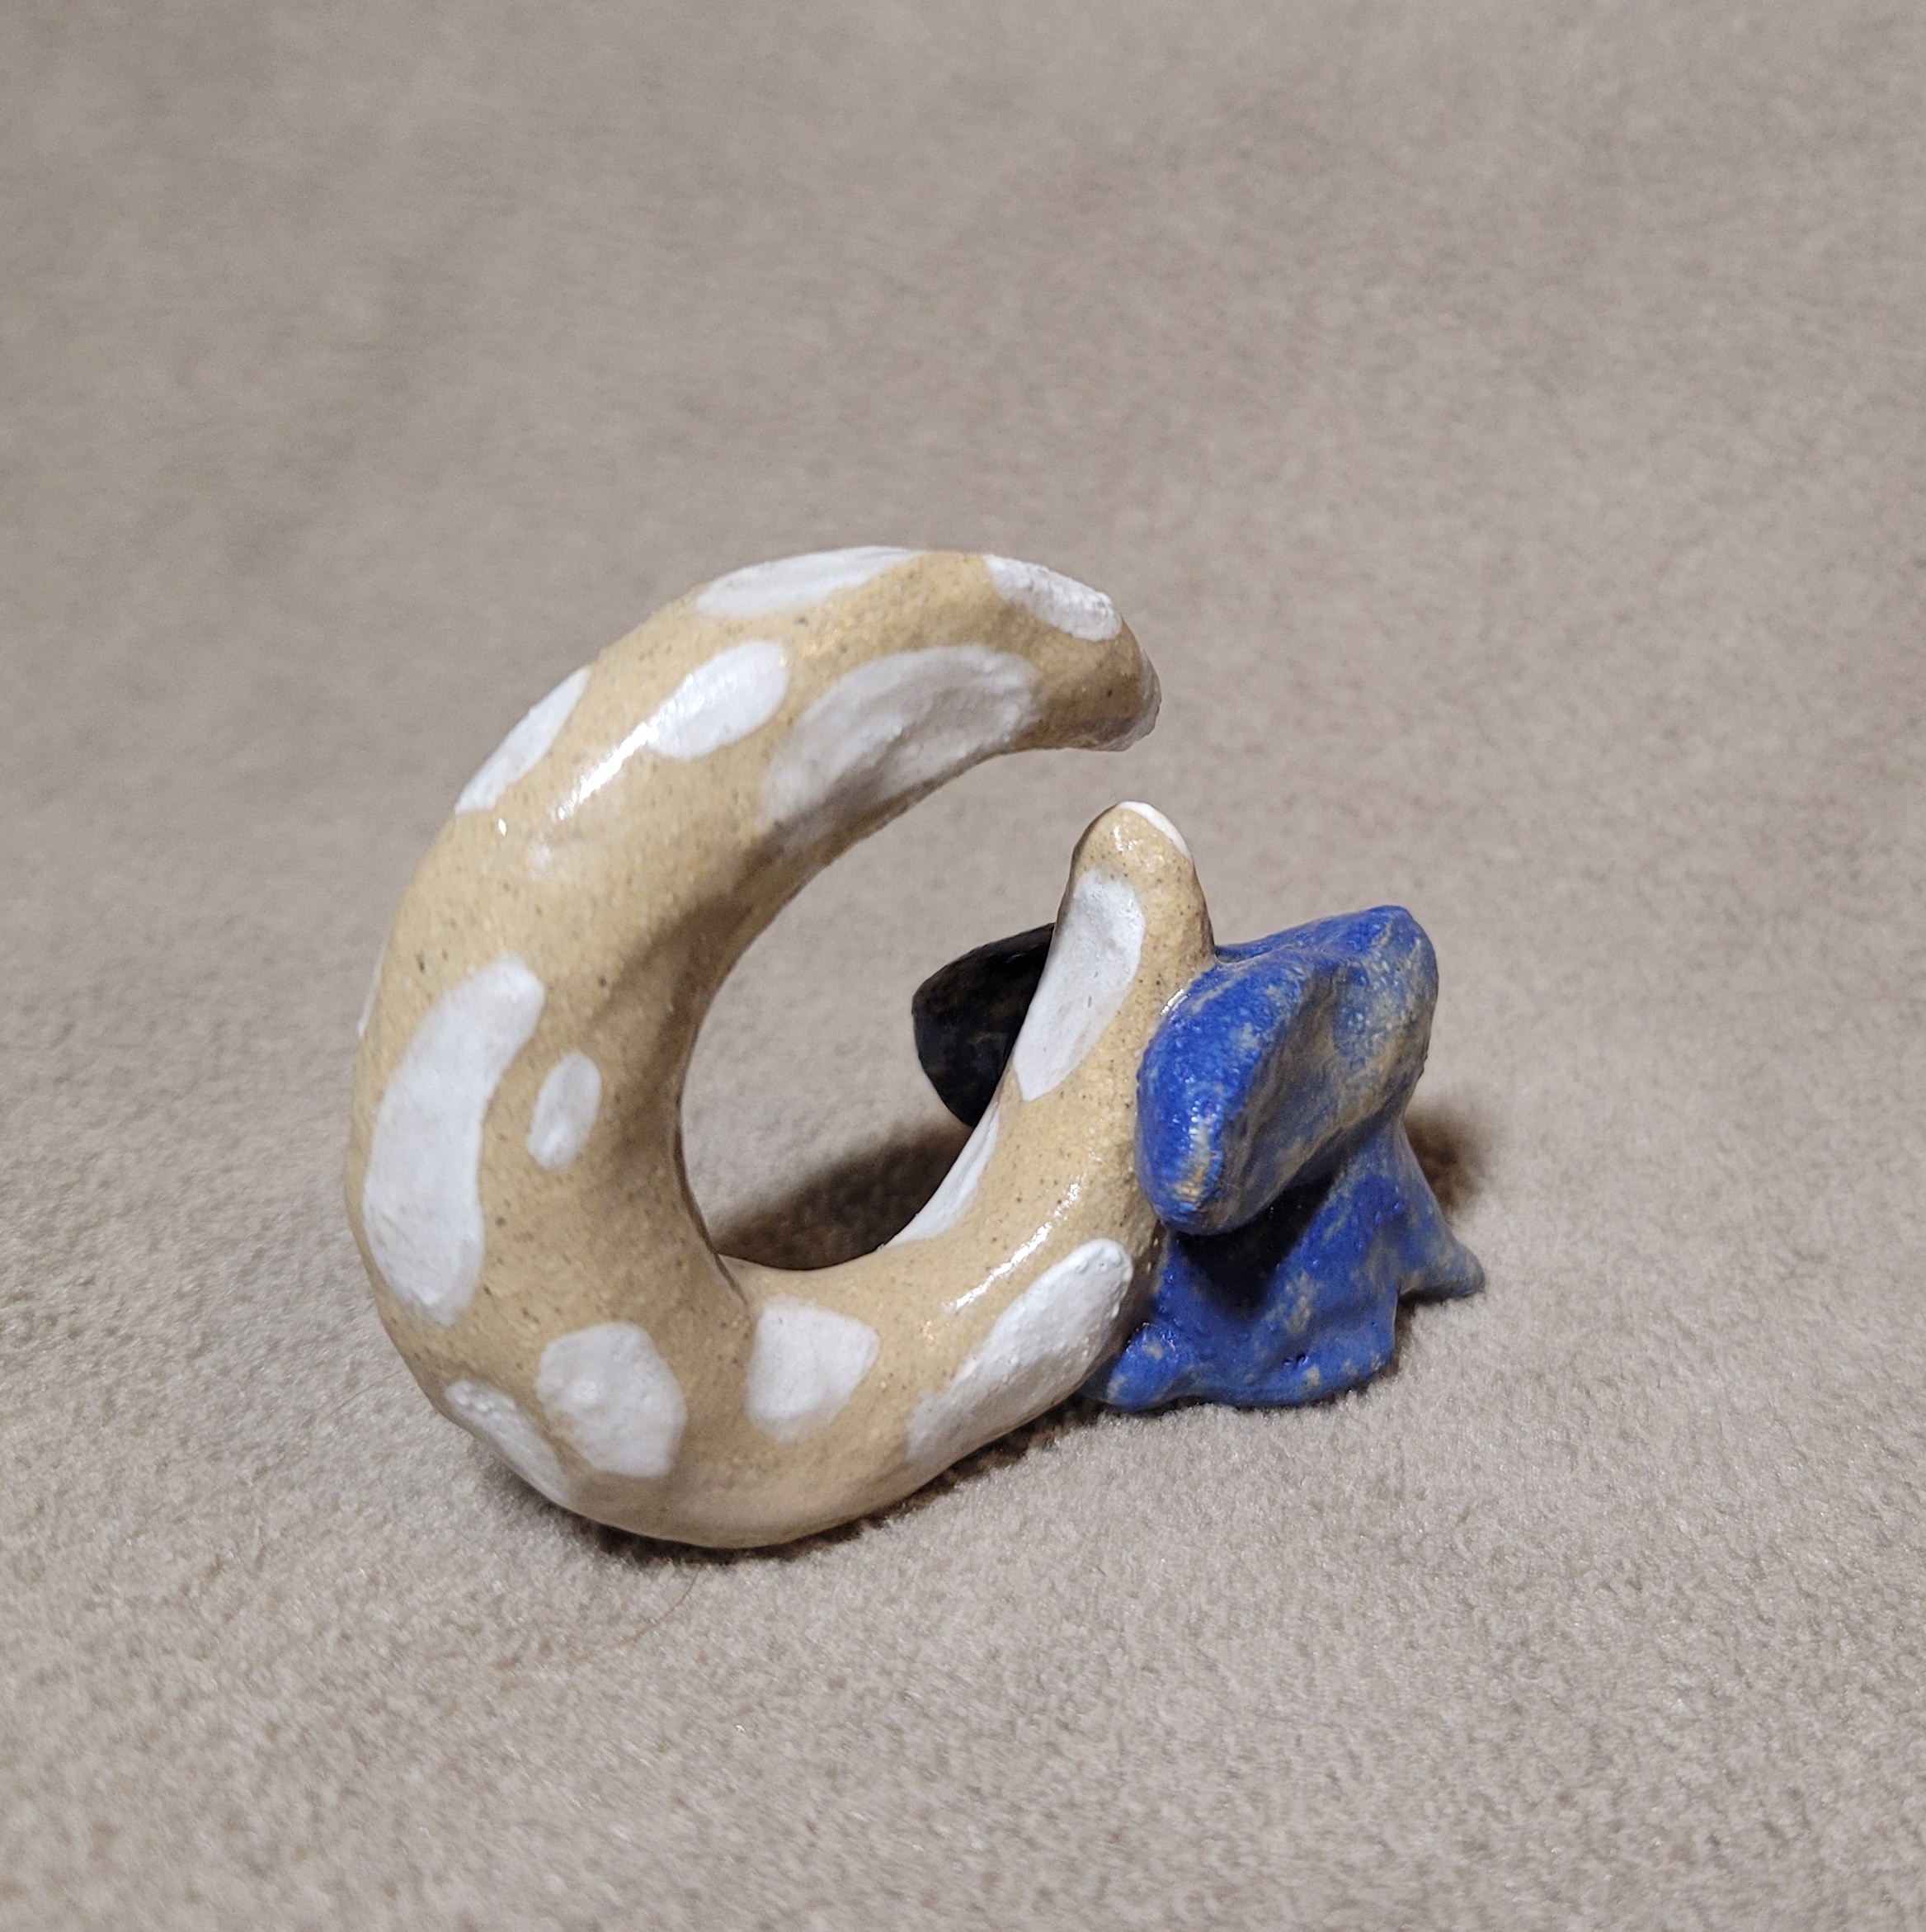 Blue ceramic bunny with a big creamy-white moon resting on its back